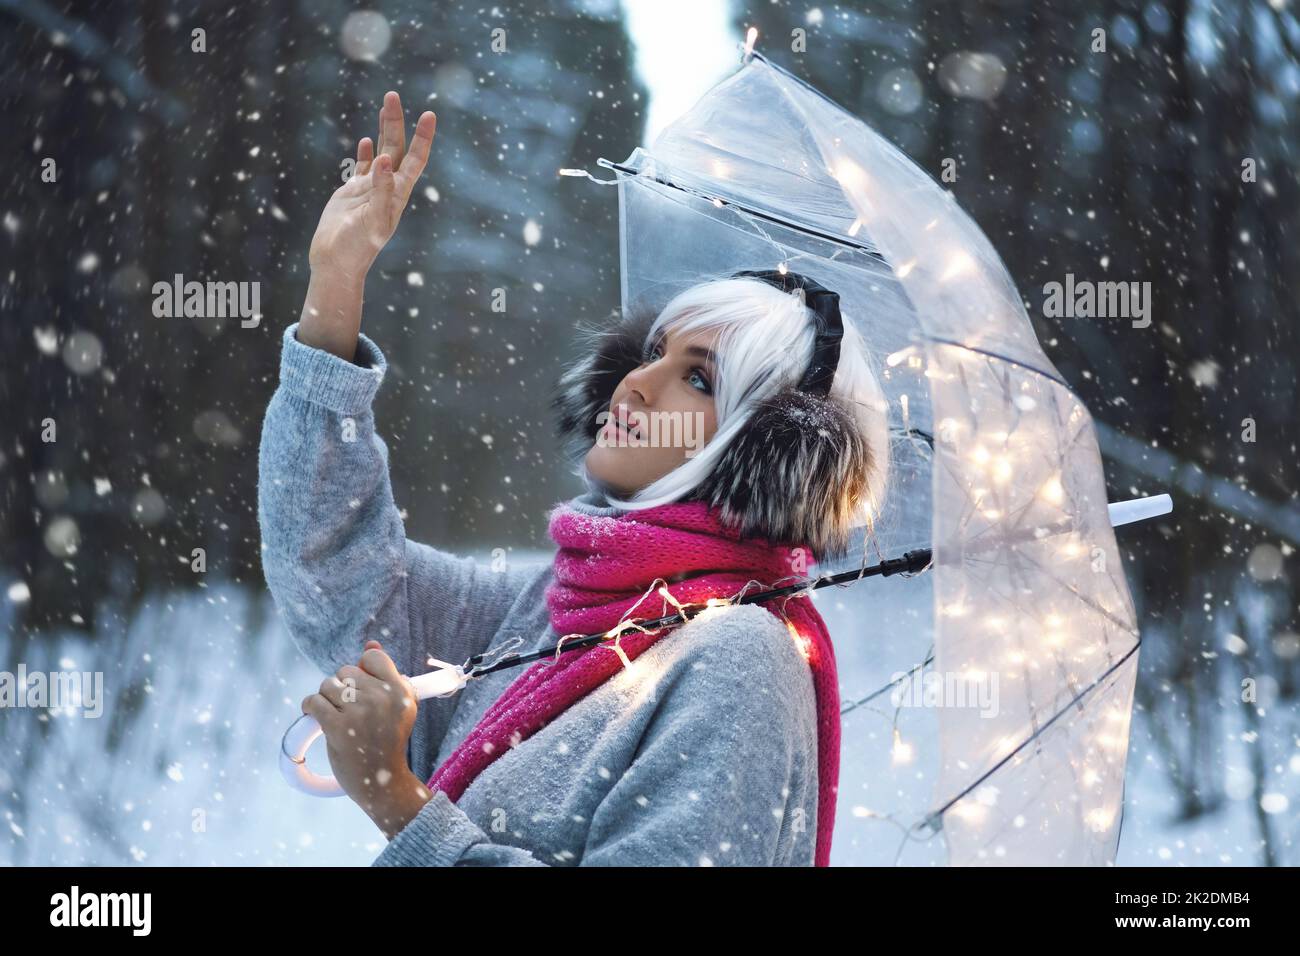 Young woman walking under transparent umbrella at snowy winter day Stock Photo